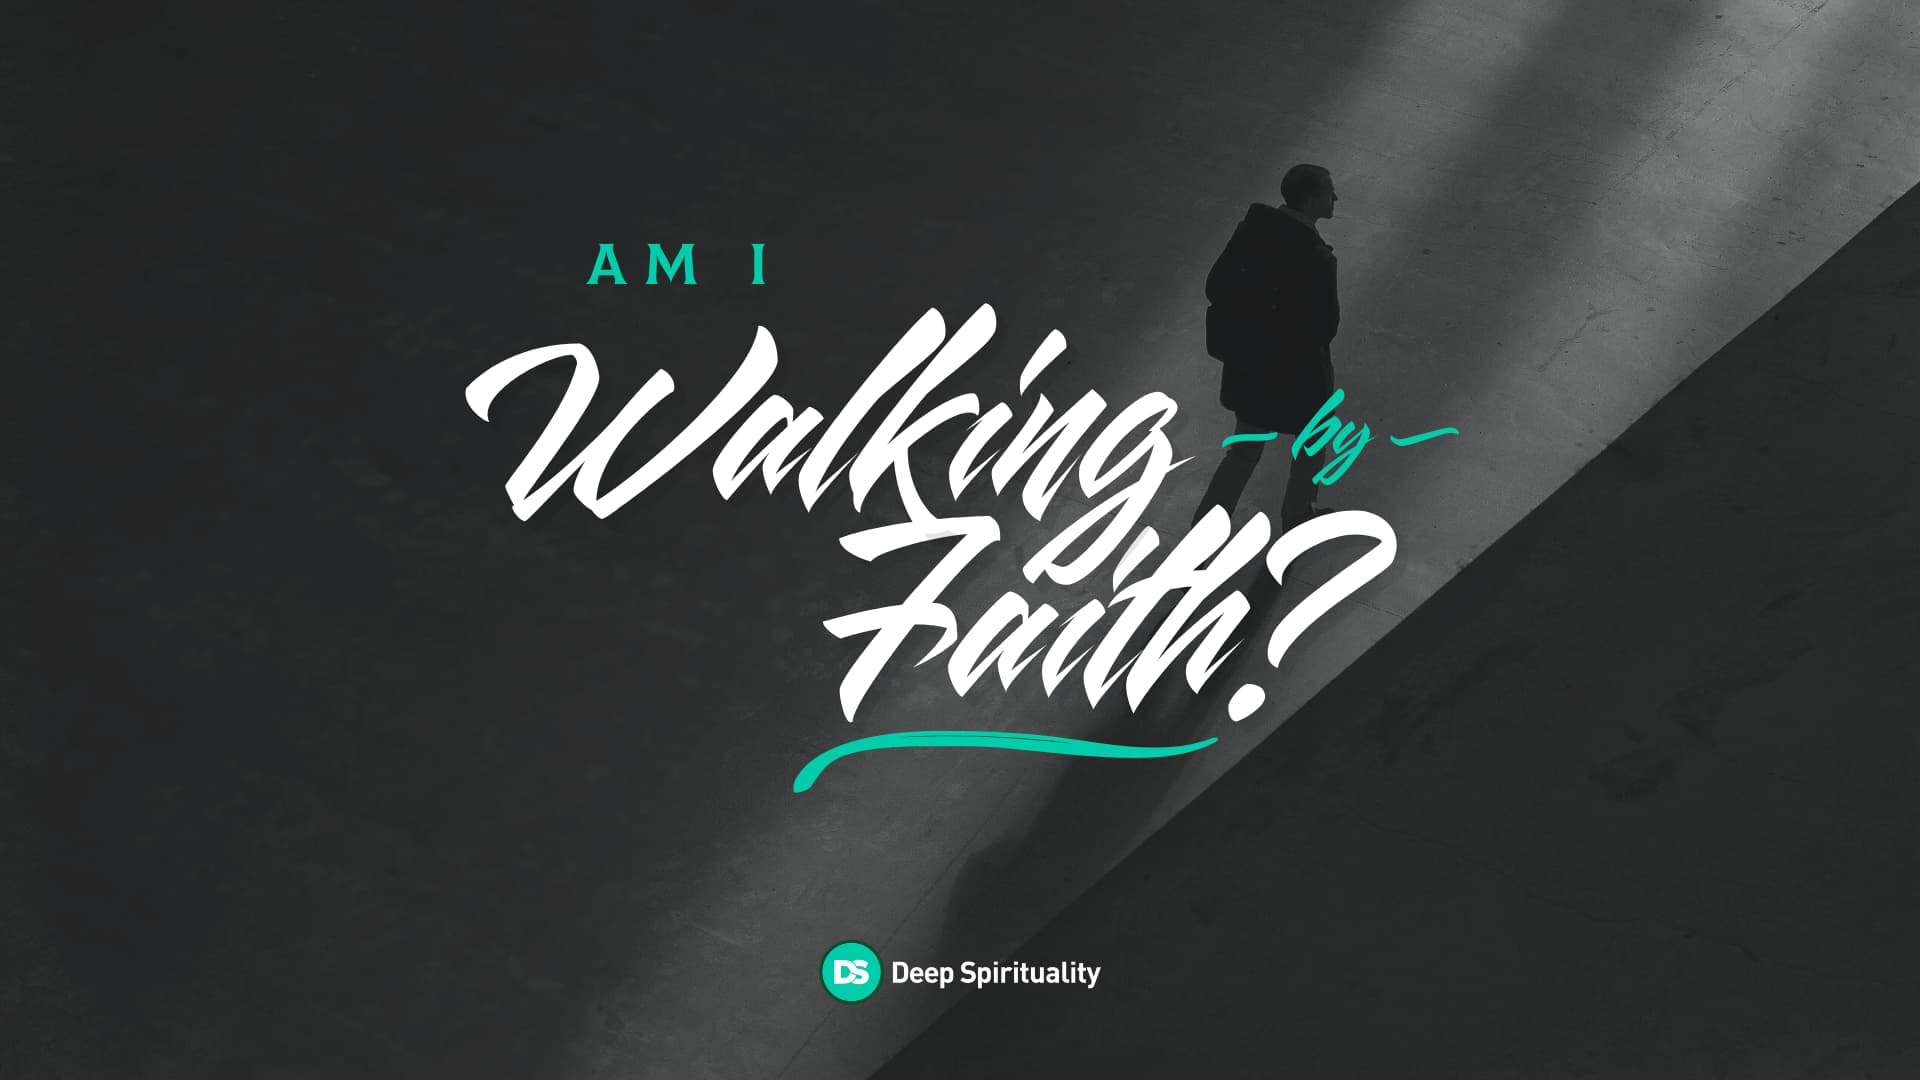 How Do I Know if I’m Walking by Faith? 5